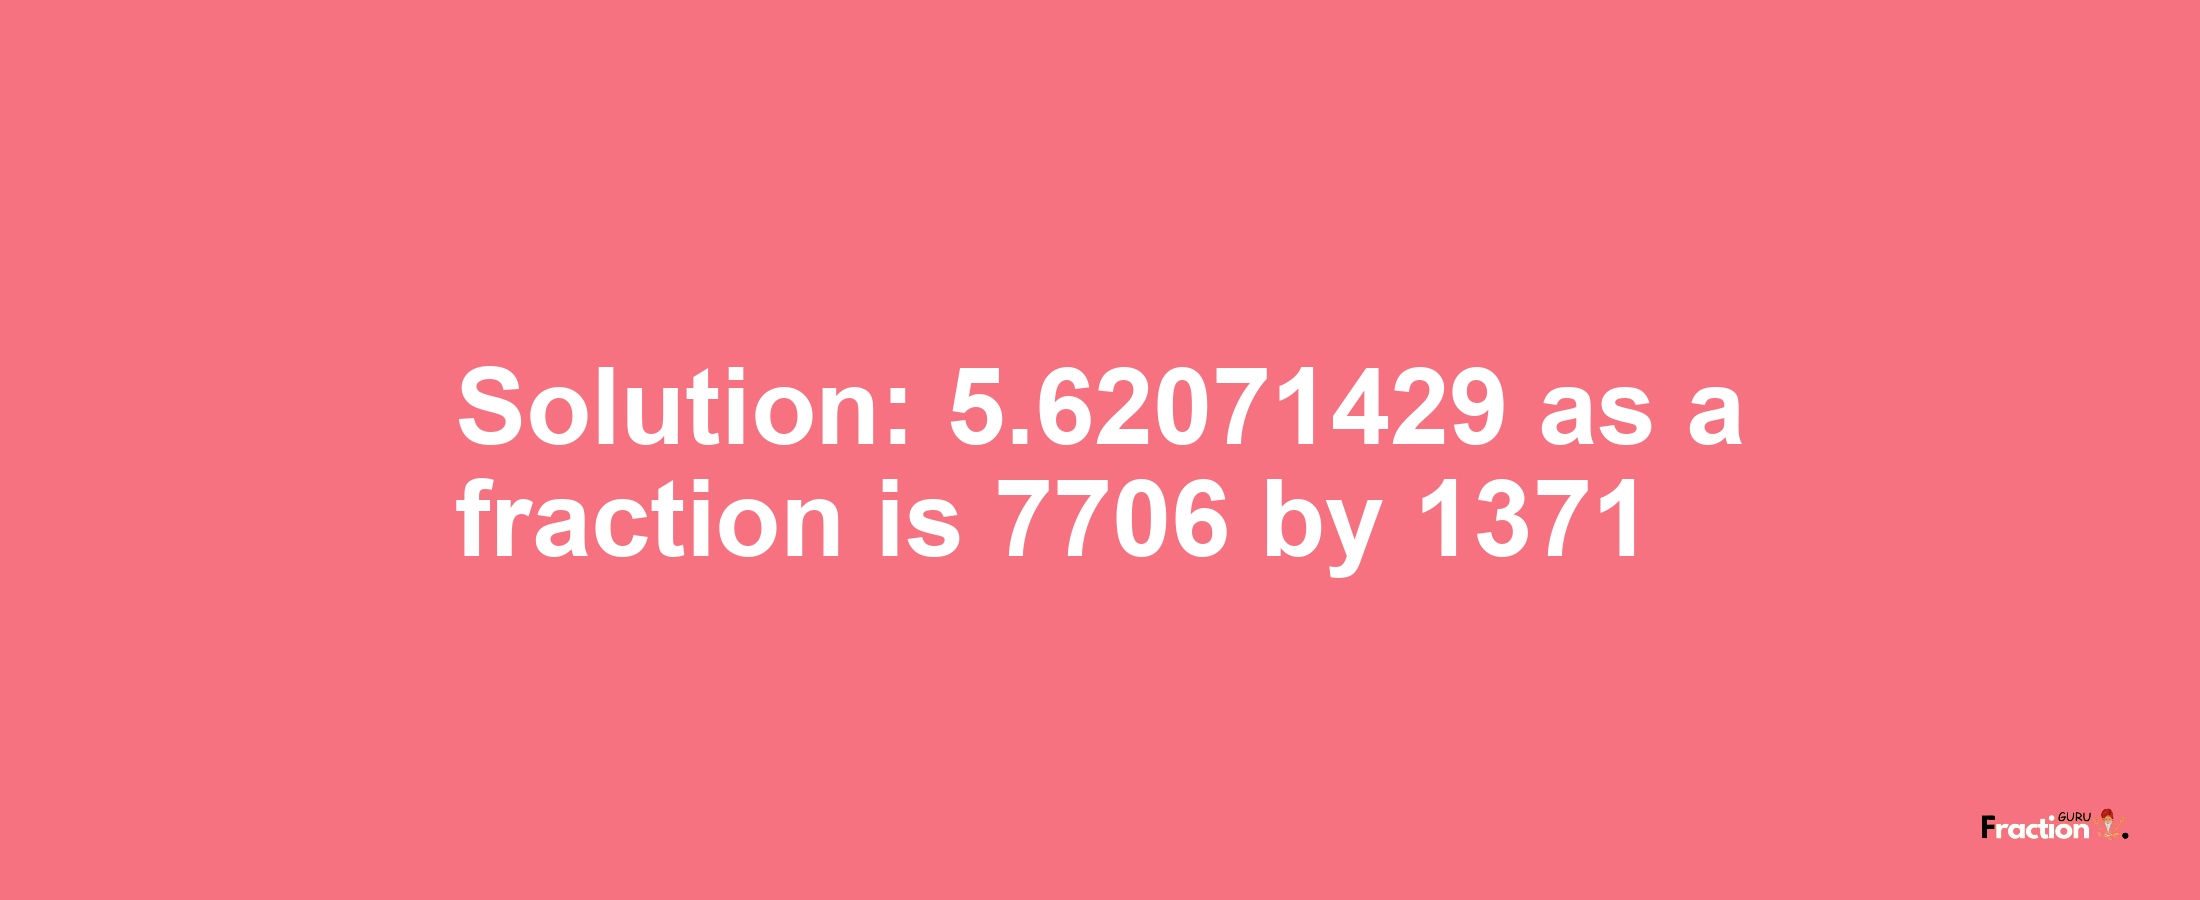 Solution:5.62071429 as a fraction is 7706/1371